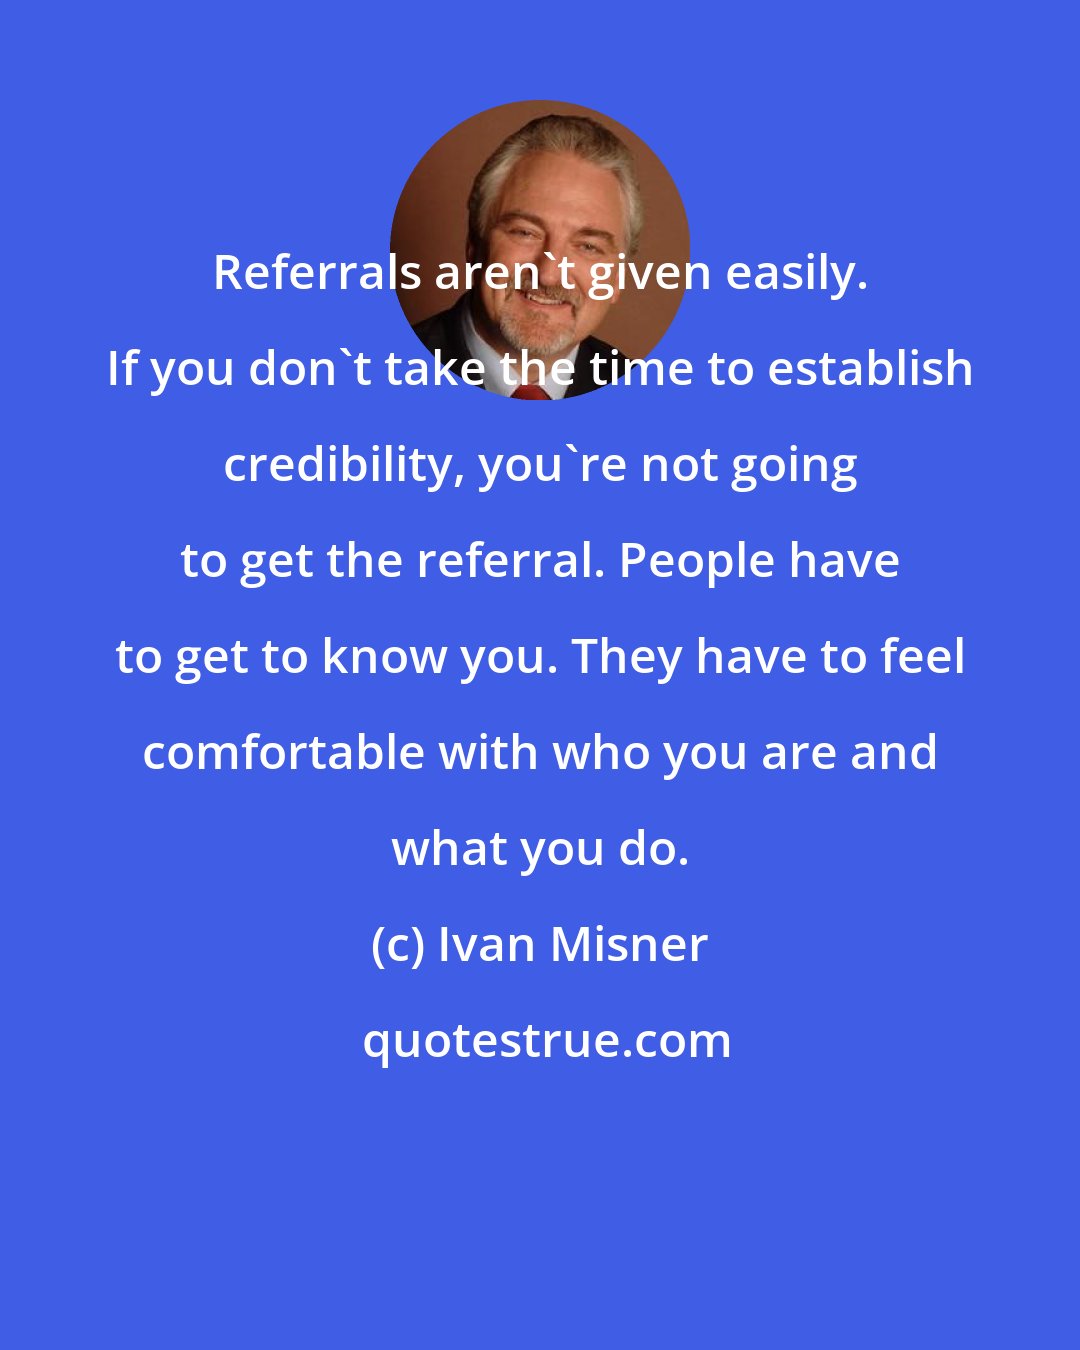 Ivan Misner: Referrals aren't given easily. If you don't take the time to establish credibility, you're not going to get the referral. People have to get to know you. They have to feel comfortable with who you are and what you do.